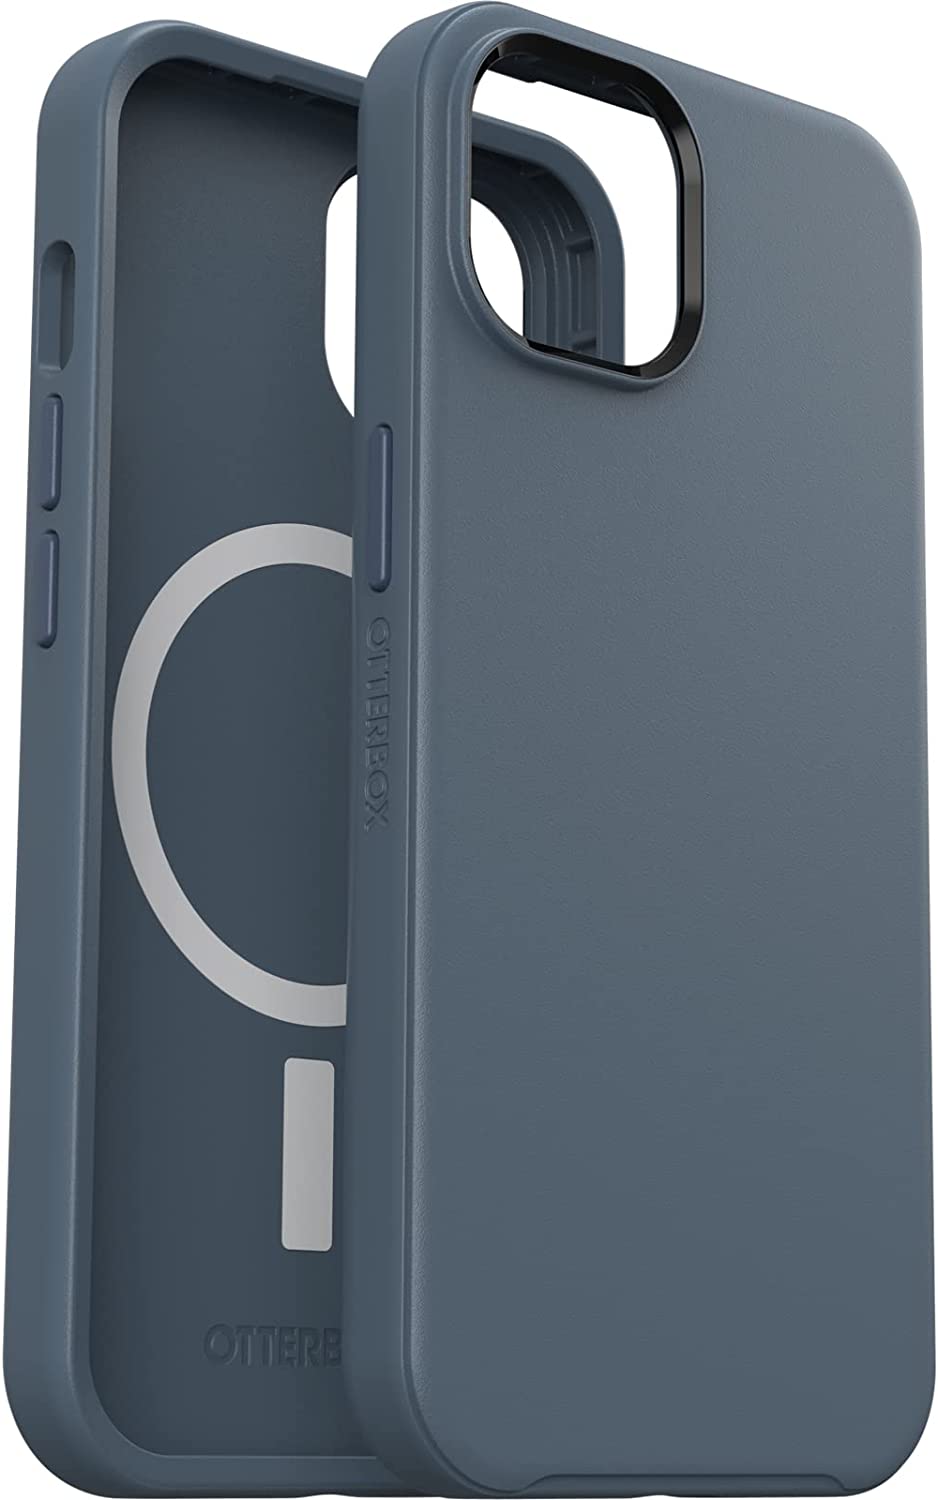     Mejor funda antibacteriana: OtterBox Symmetry+ Clear Antimicrobial Case con MagSafe